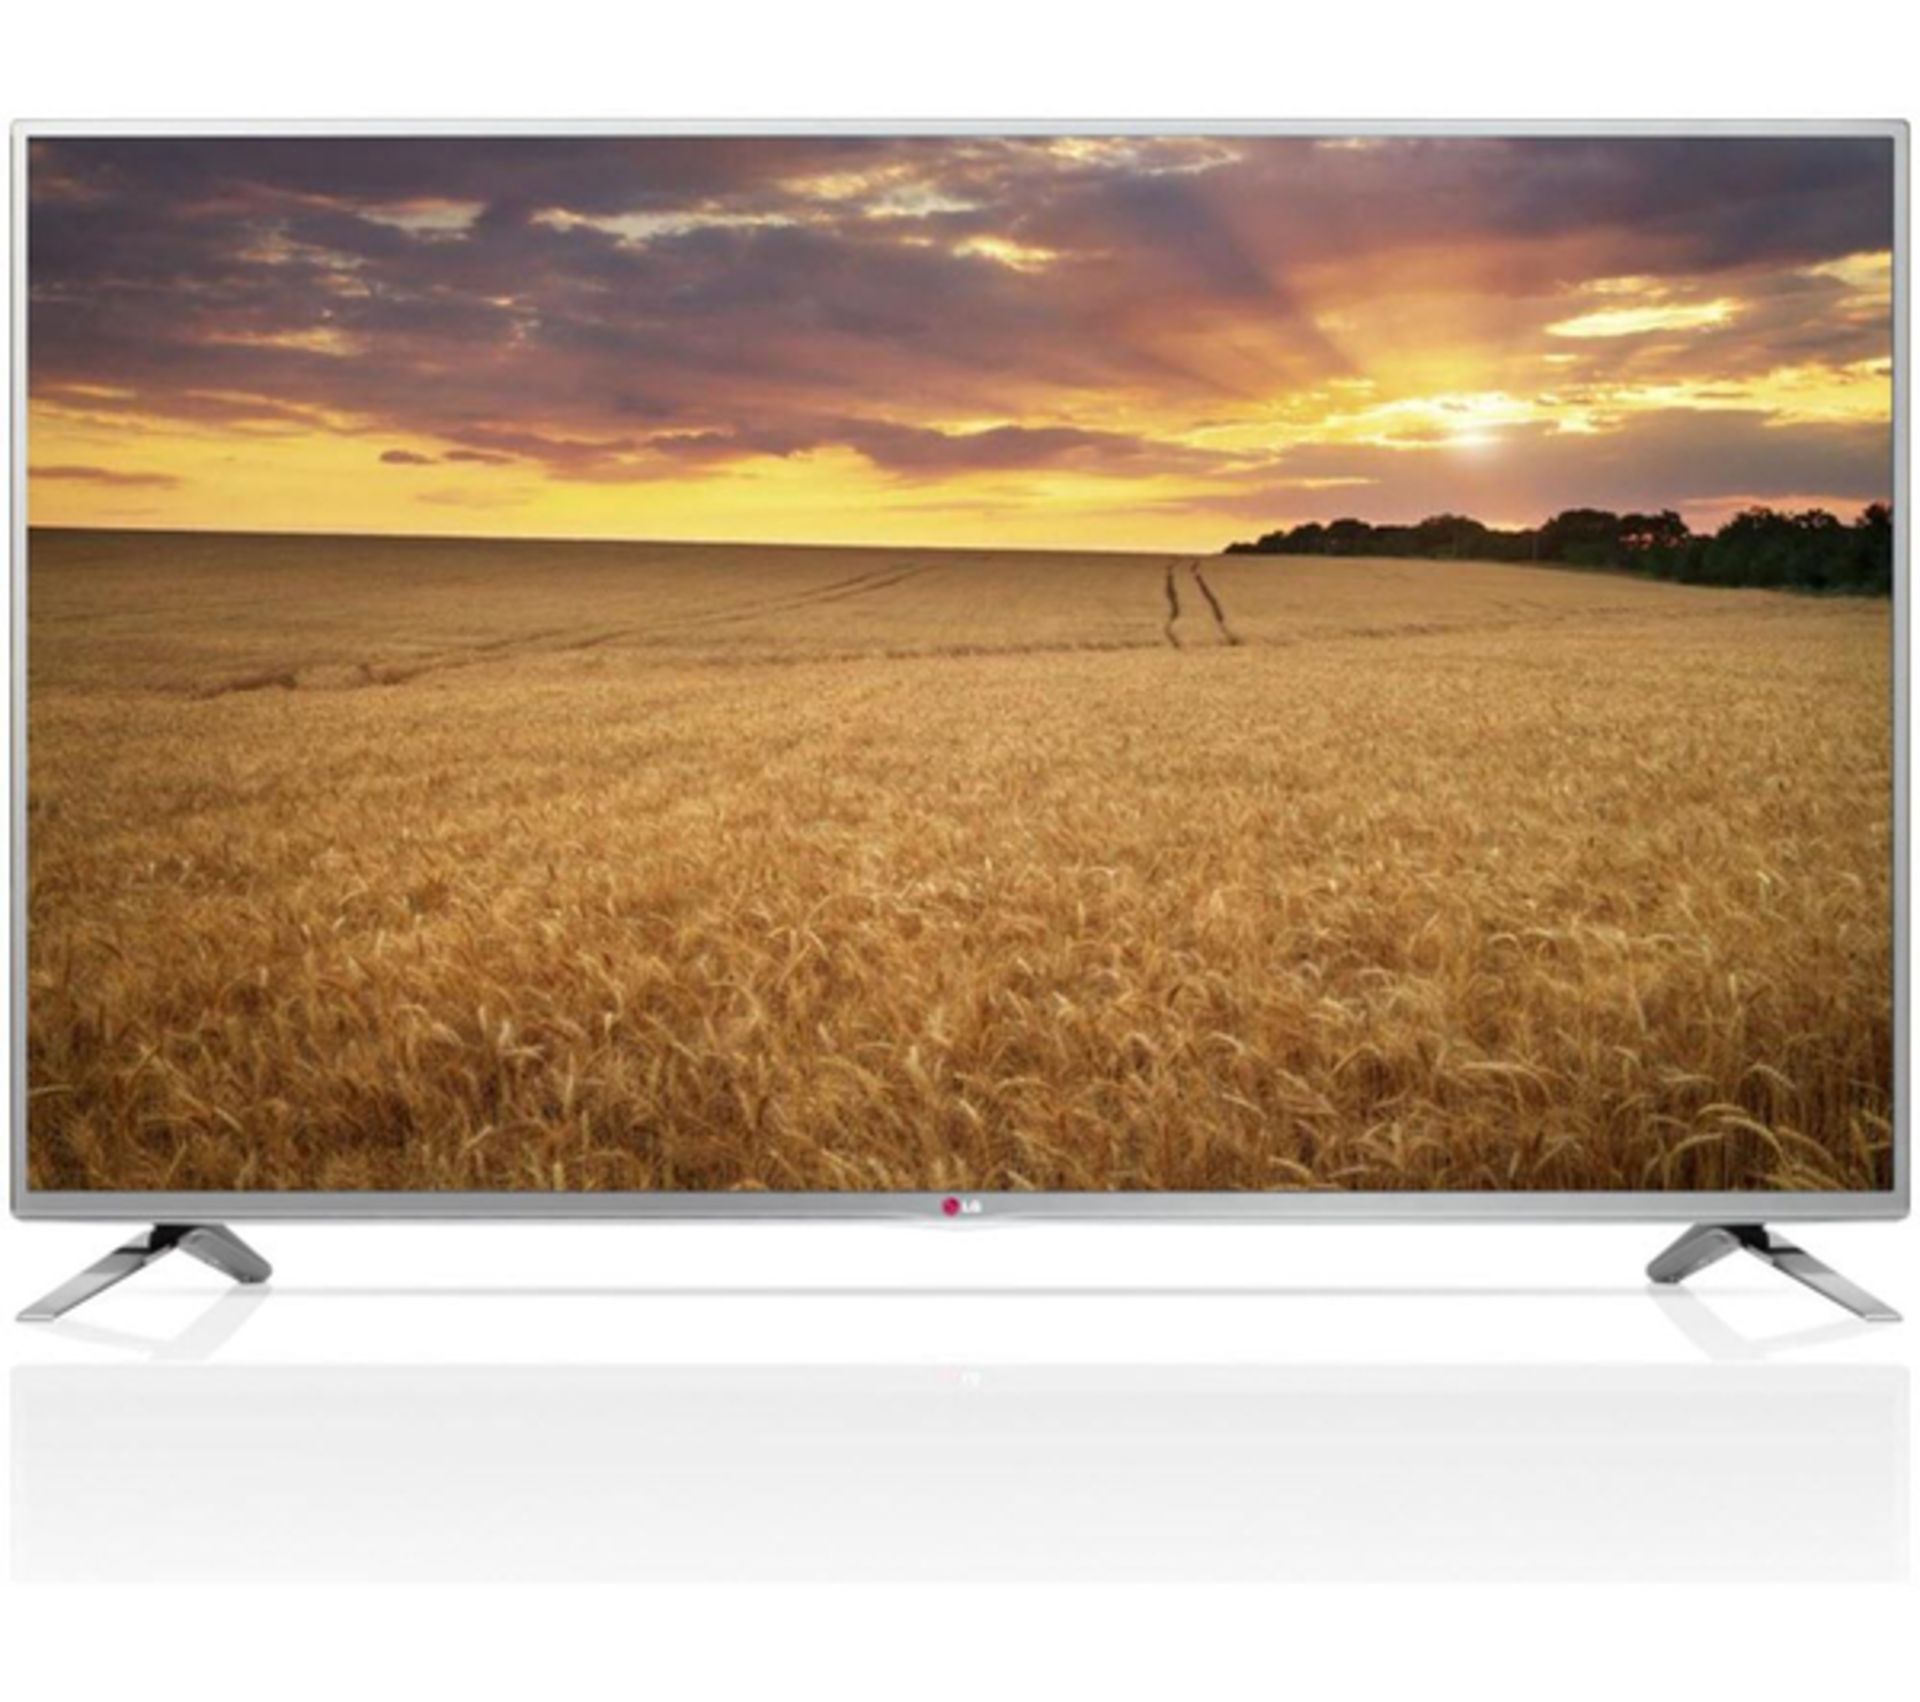 V Grade A LG 70LB650V 70" Widescreen Full HD 1080p LED LCD 3D Smart TV With Freeview HD - Built In